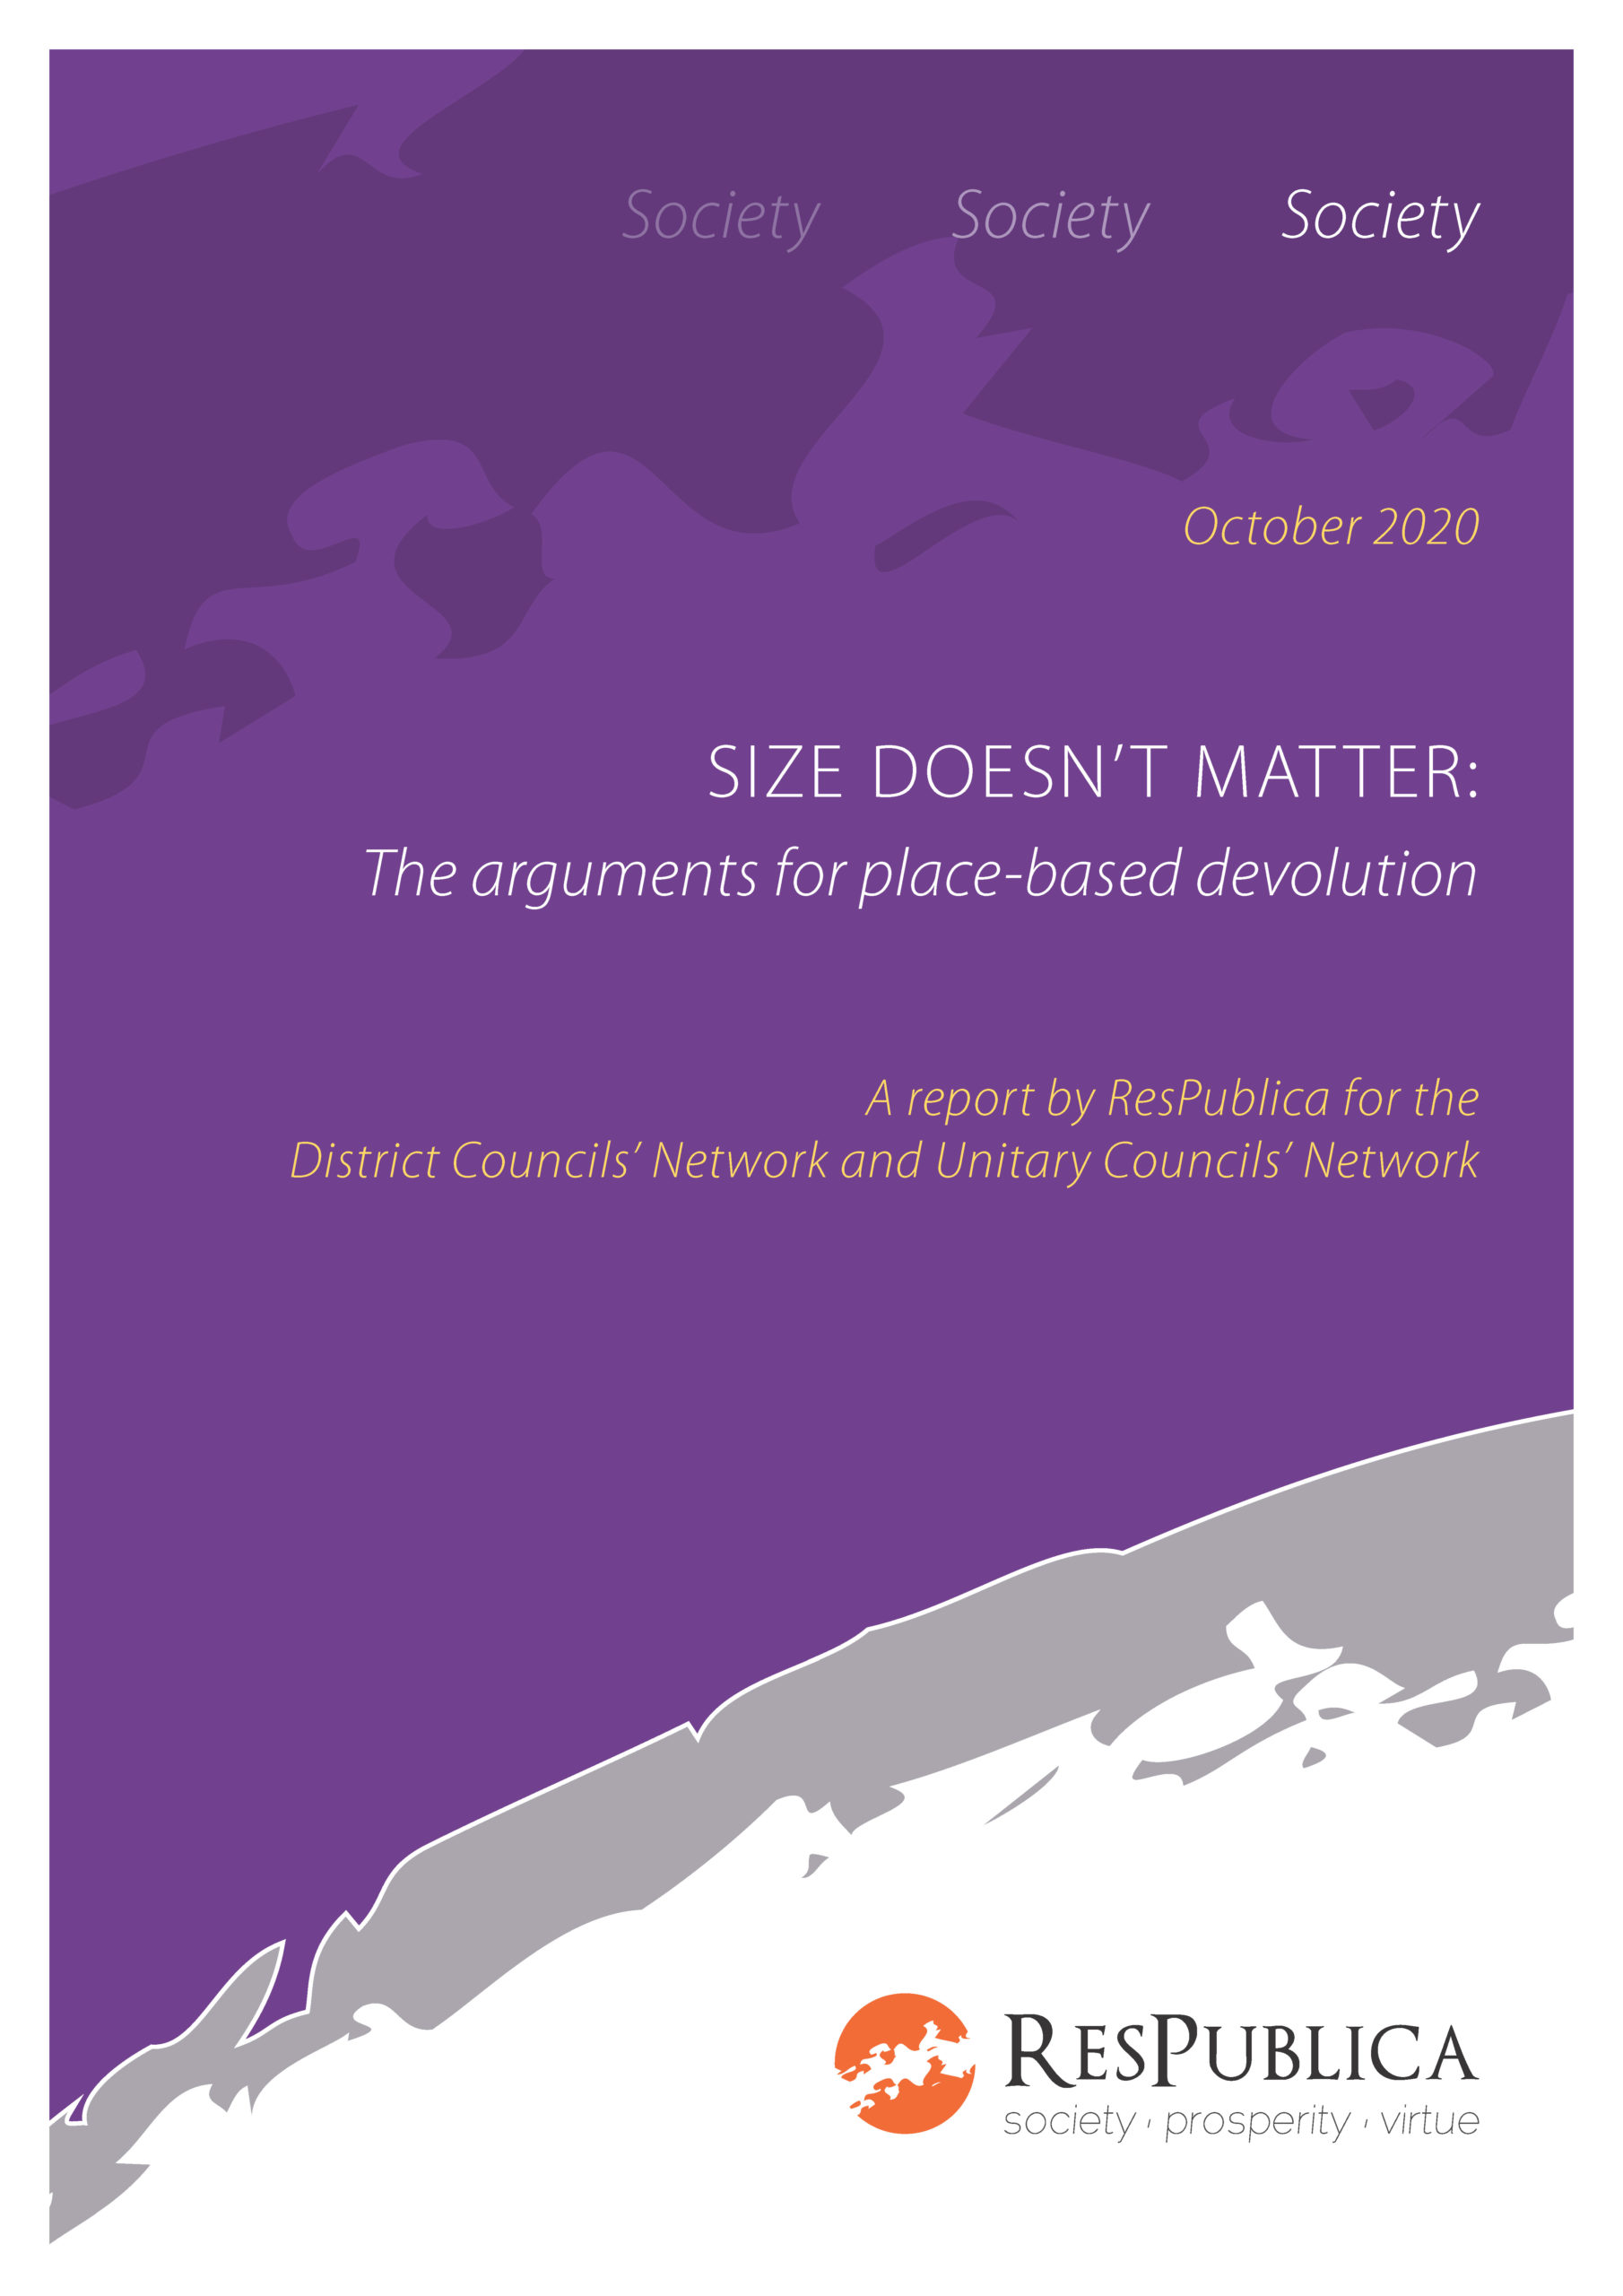 Size doesn’t matter: The arguments for place-based devolution